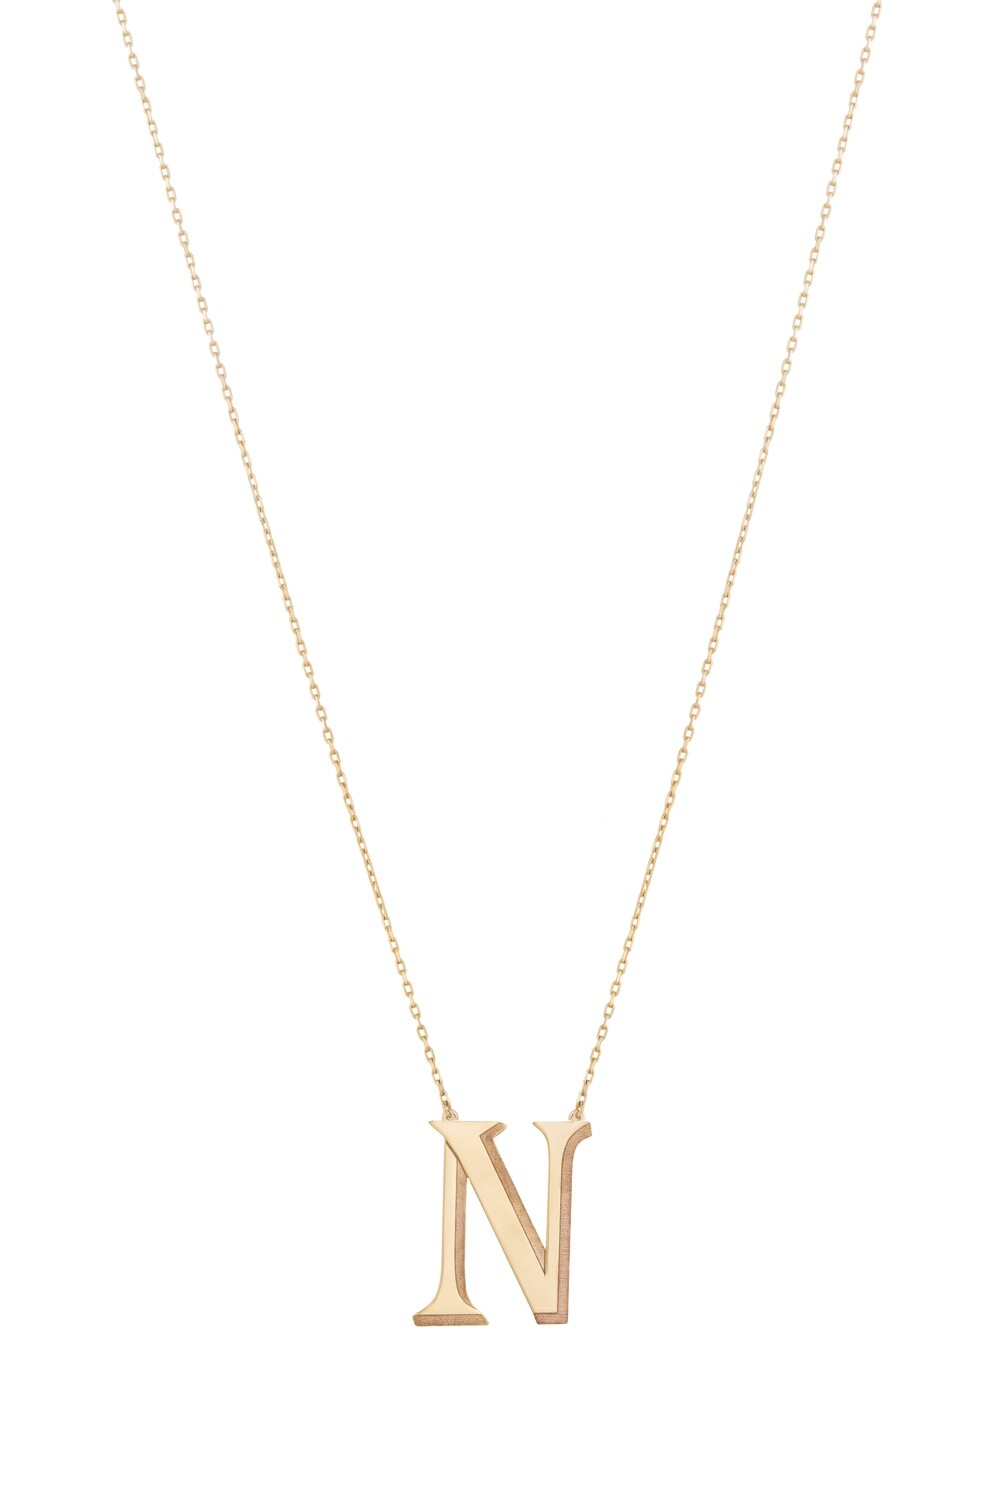 Initials Gold Necklace Letter N